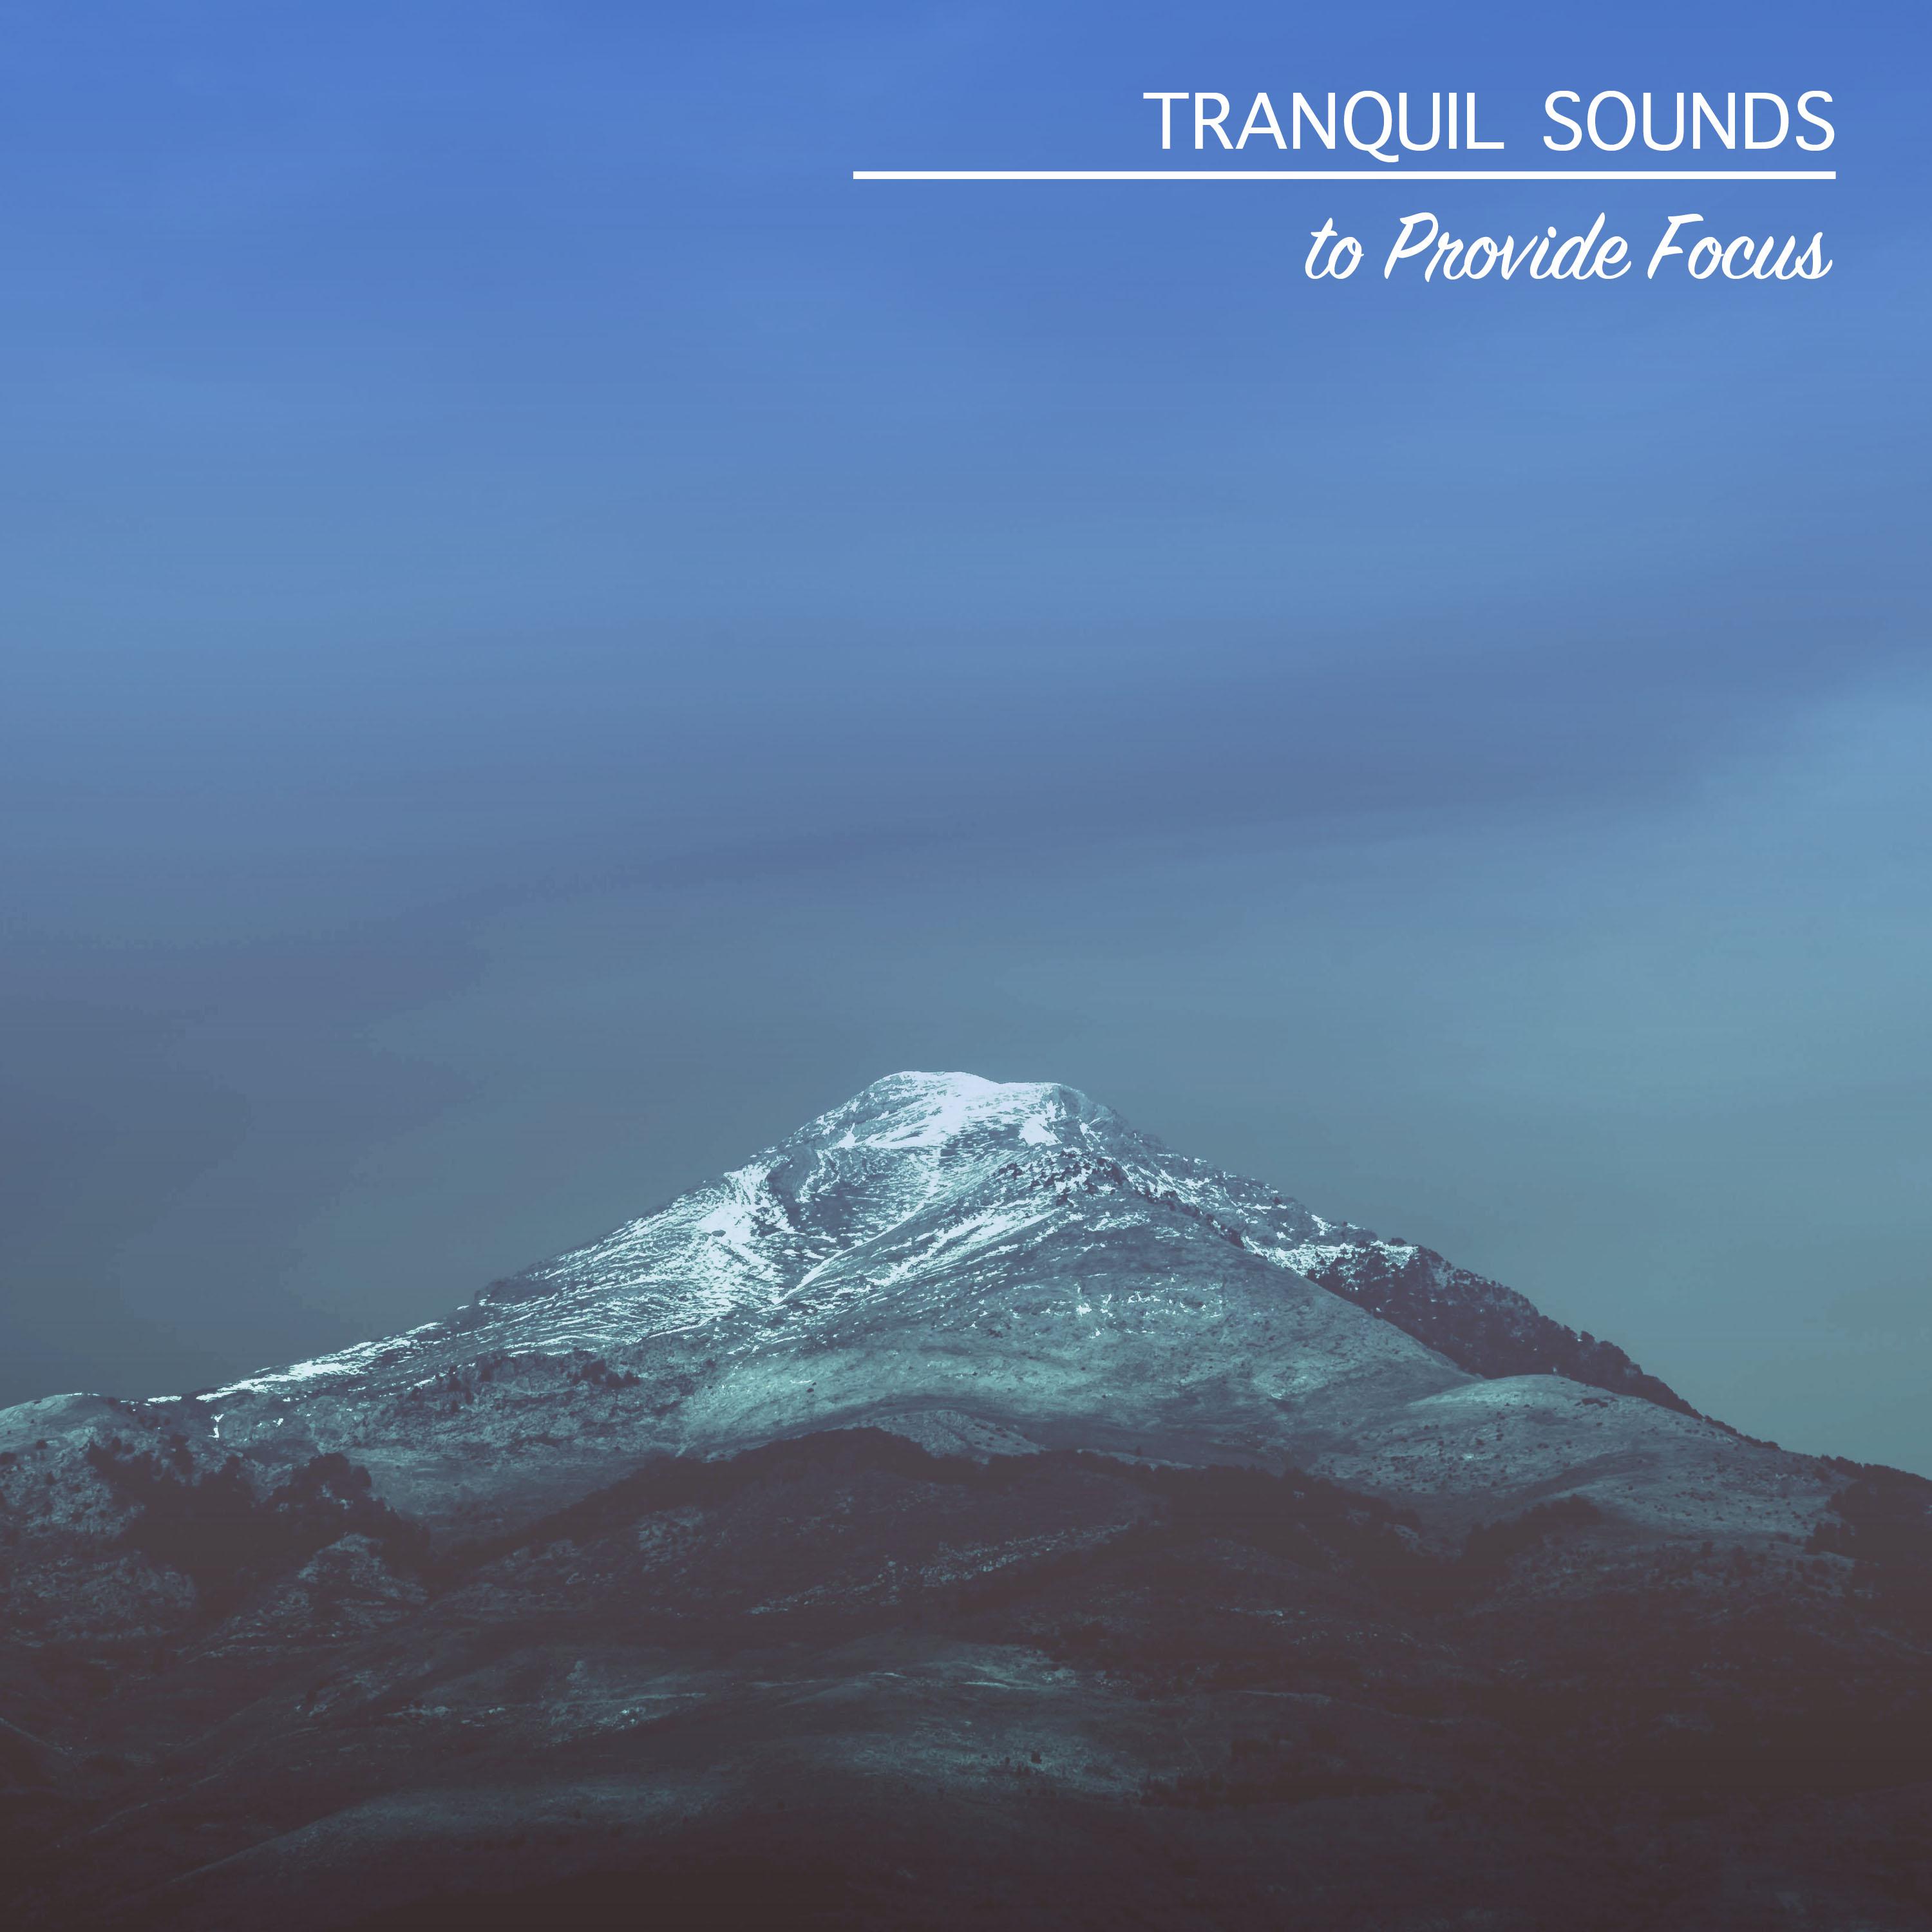 15 Tranquil Sounds to Provide Focus